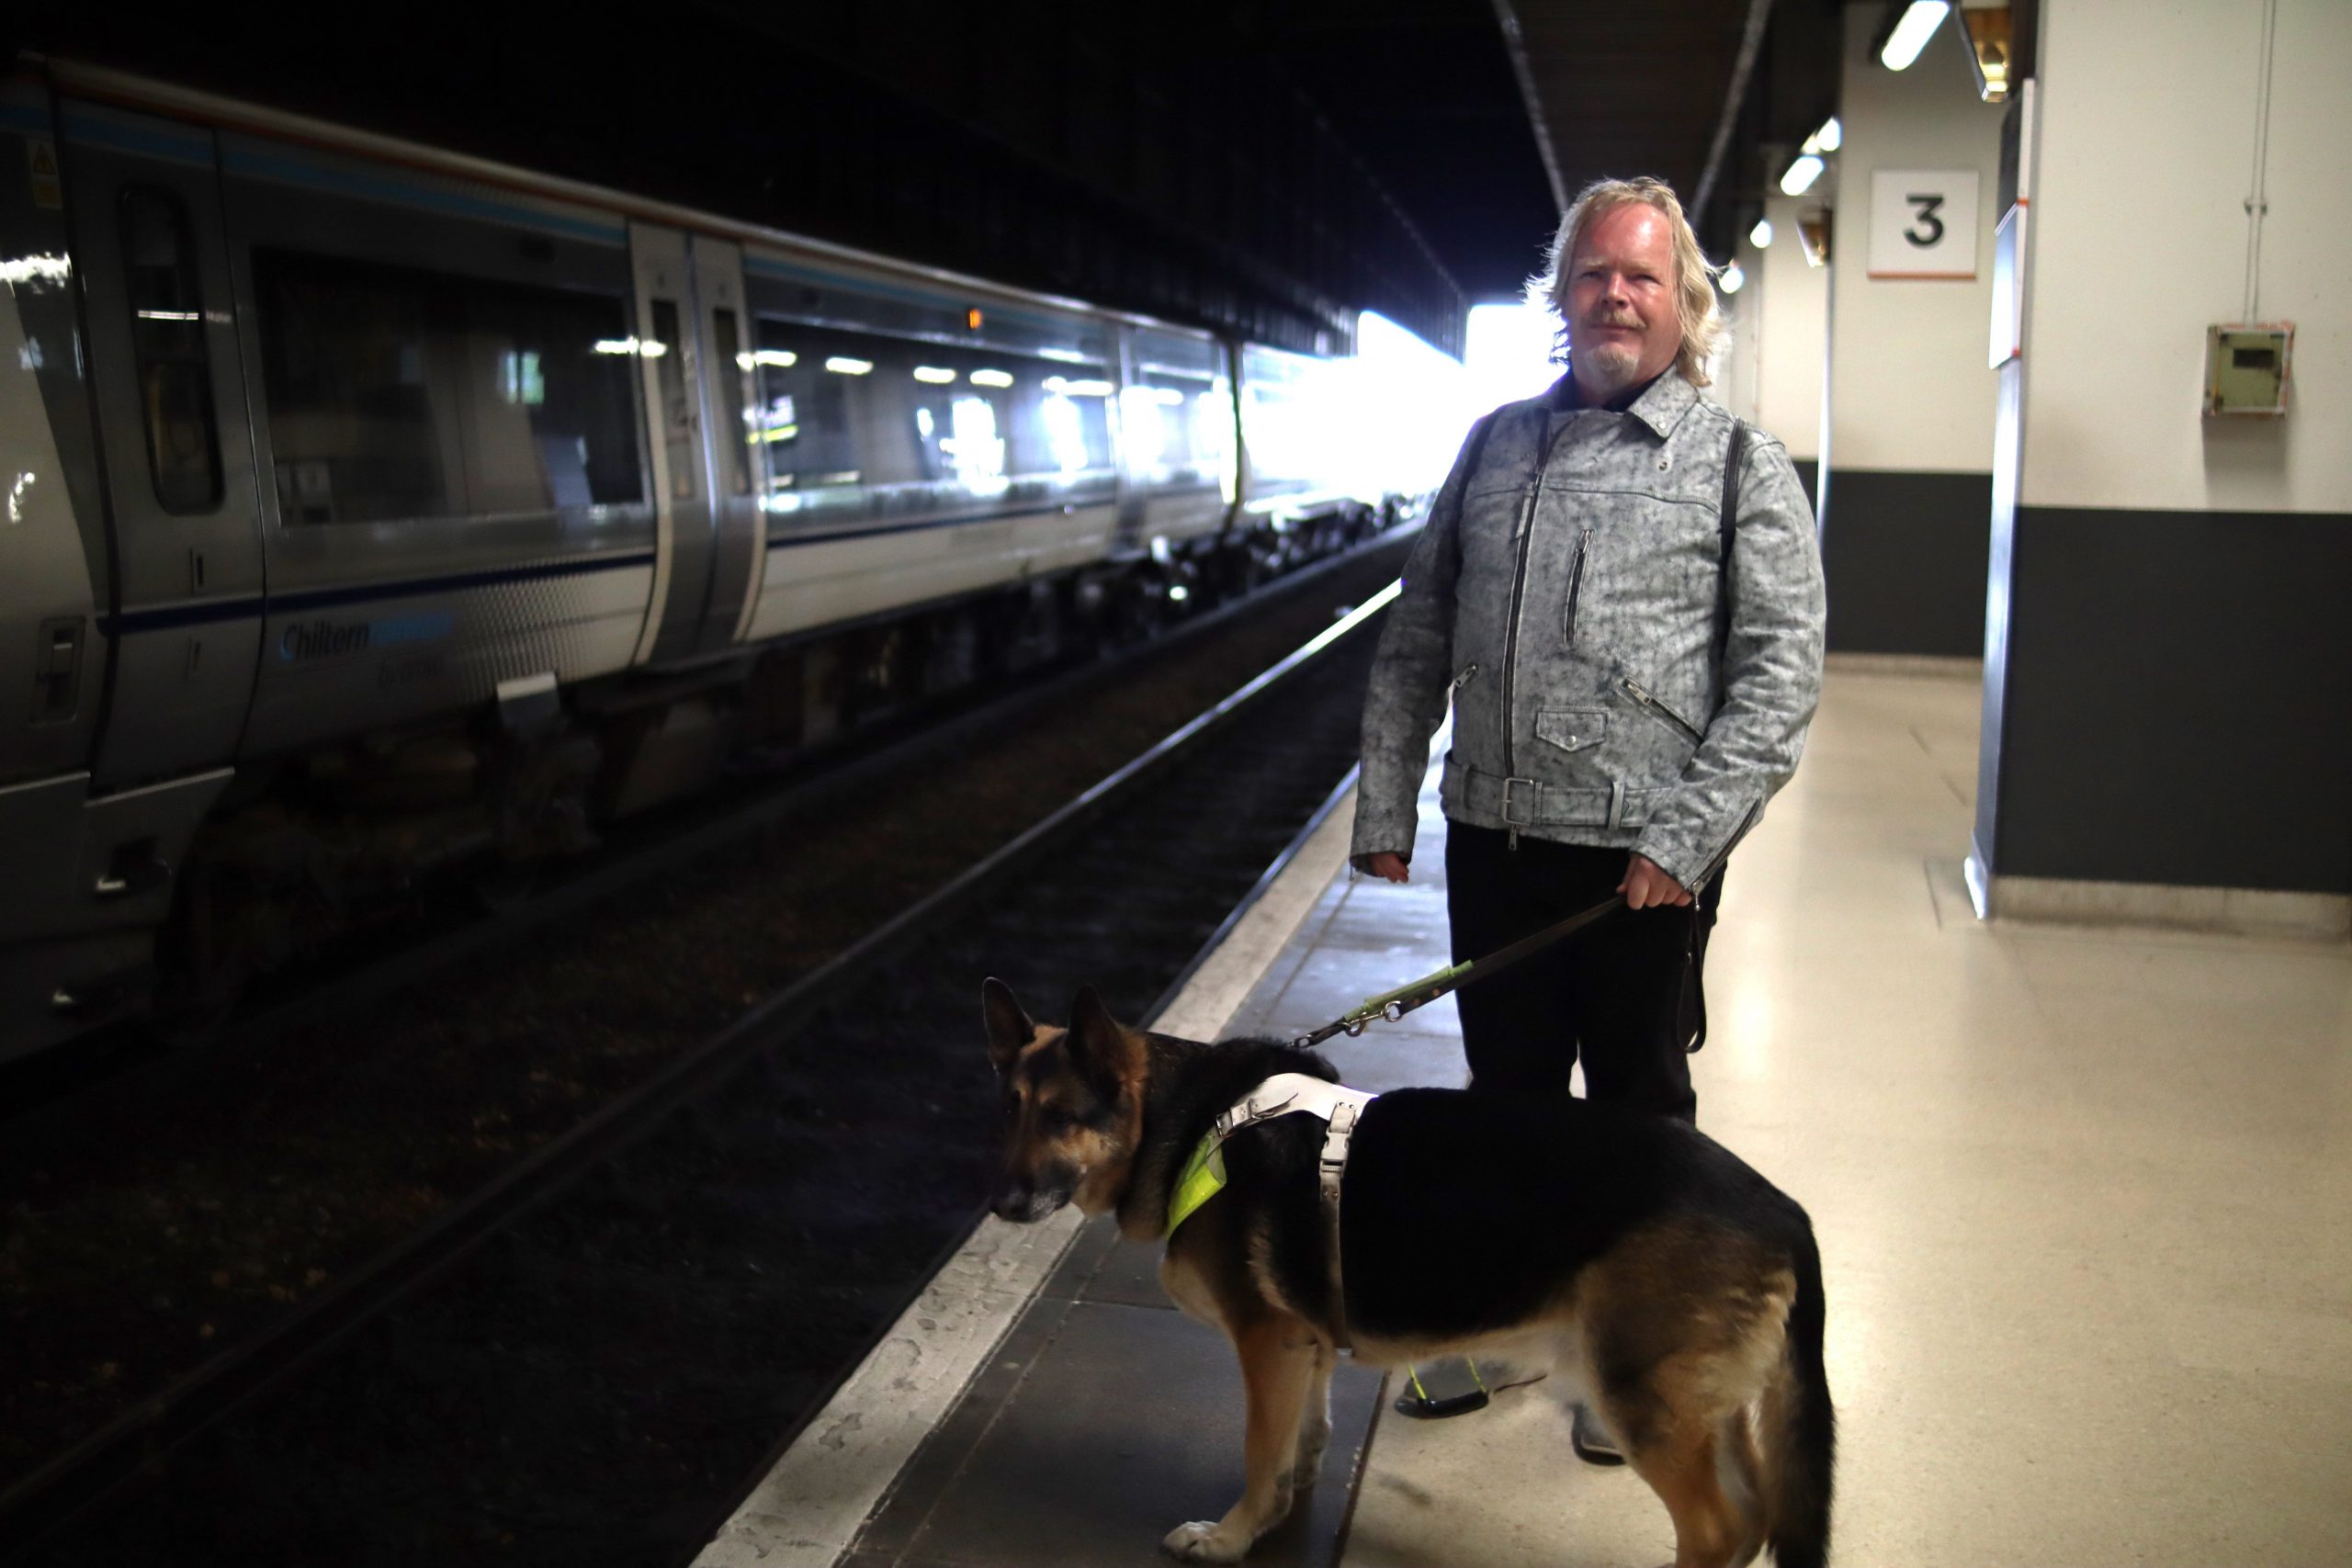 Steve Keith, Birmingham and Black Country Sight Loss Council member, standing on a train platform with his guide dog. Steve is looking at the camera, smiling. His guide dog is looking at the tracks. A train is shown on the opposite platform.